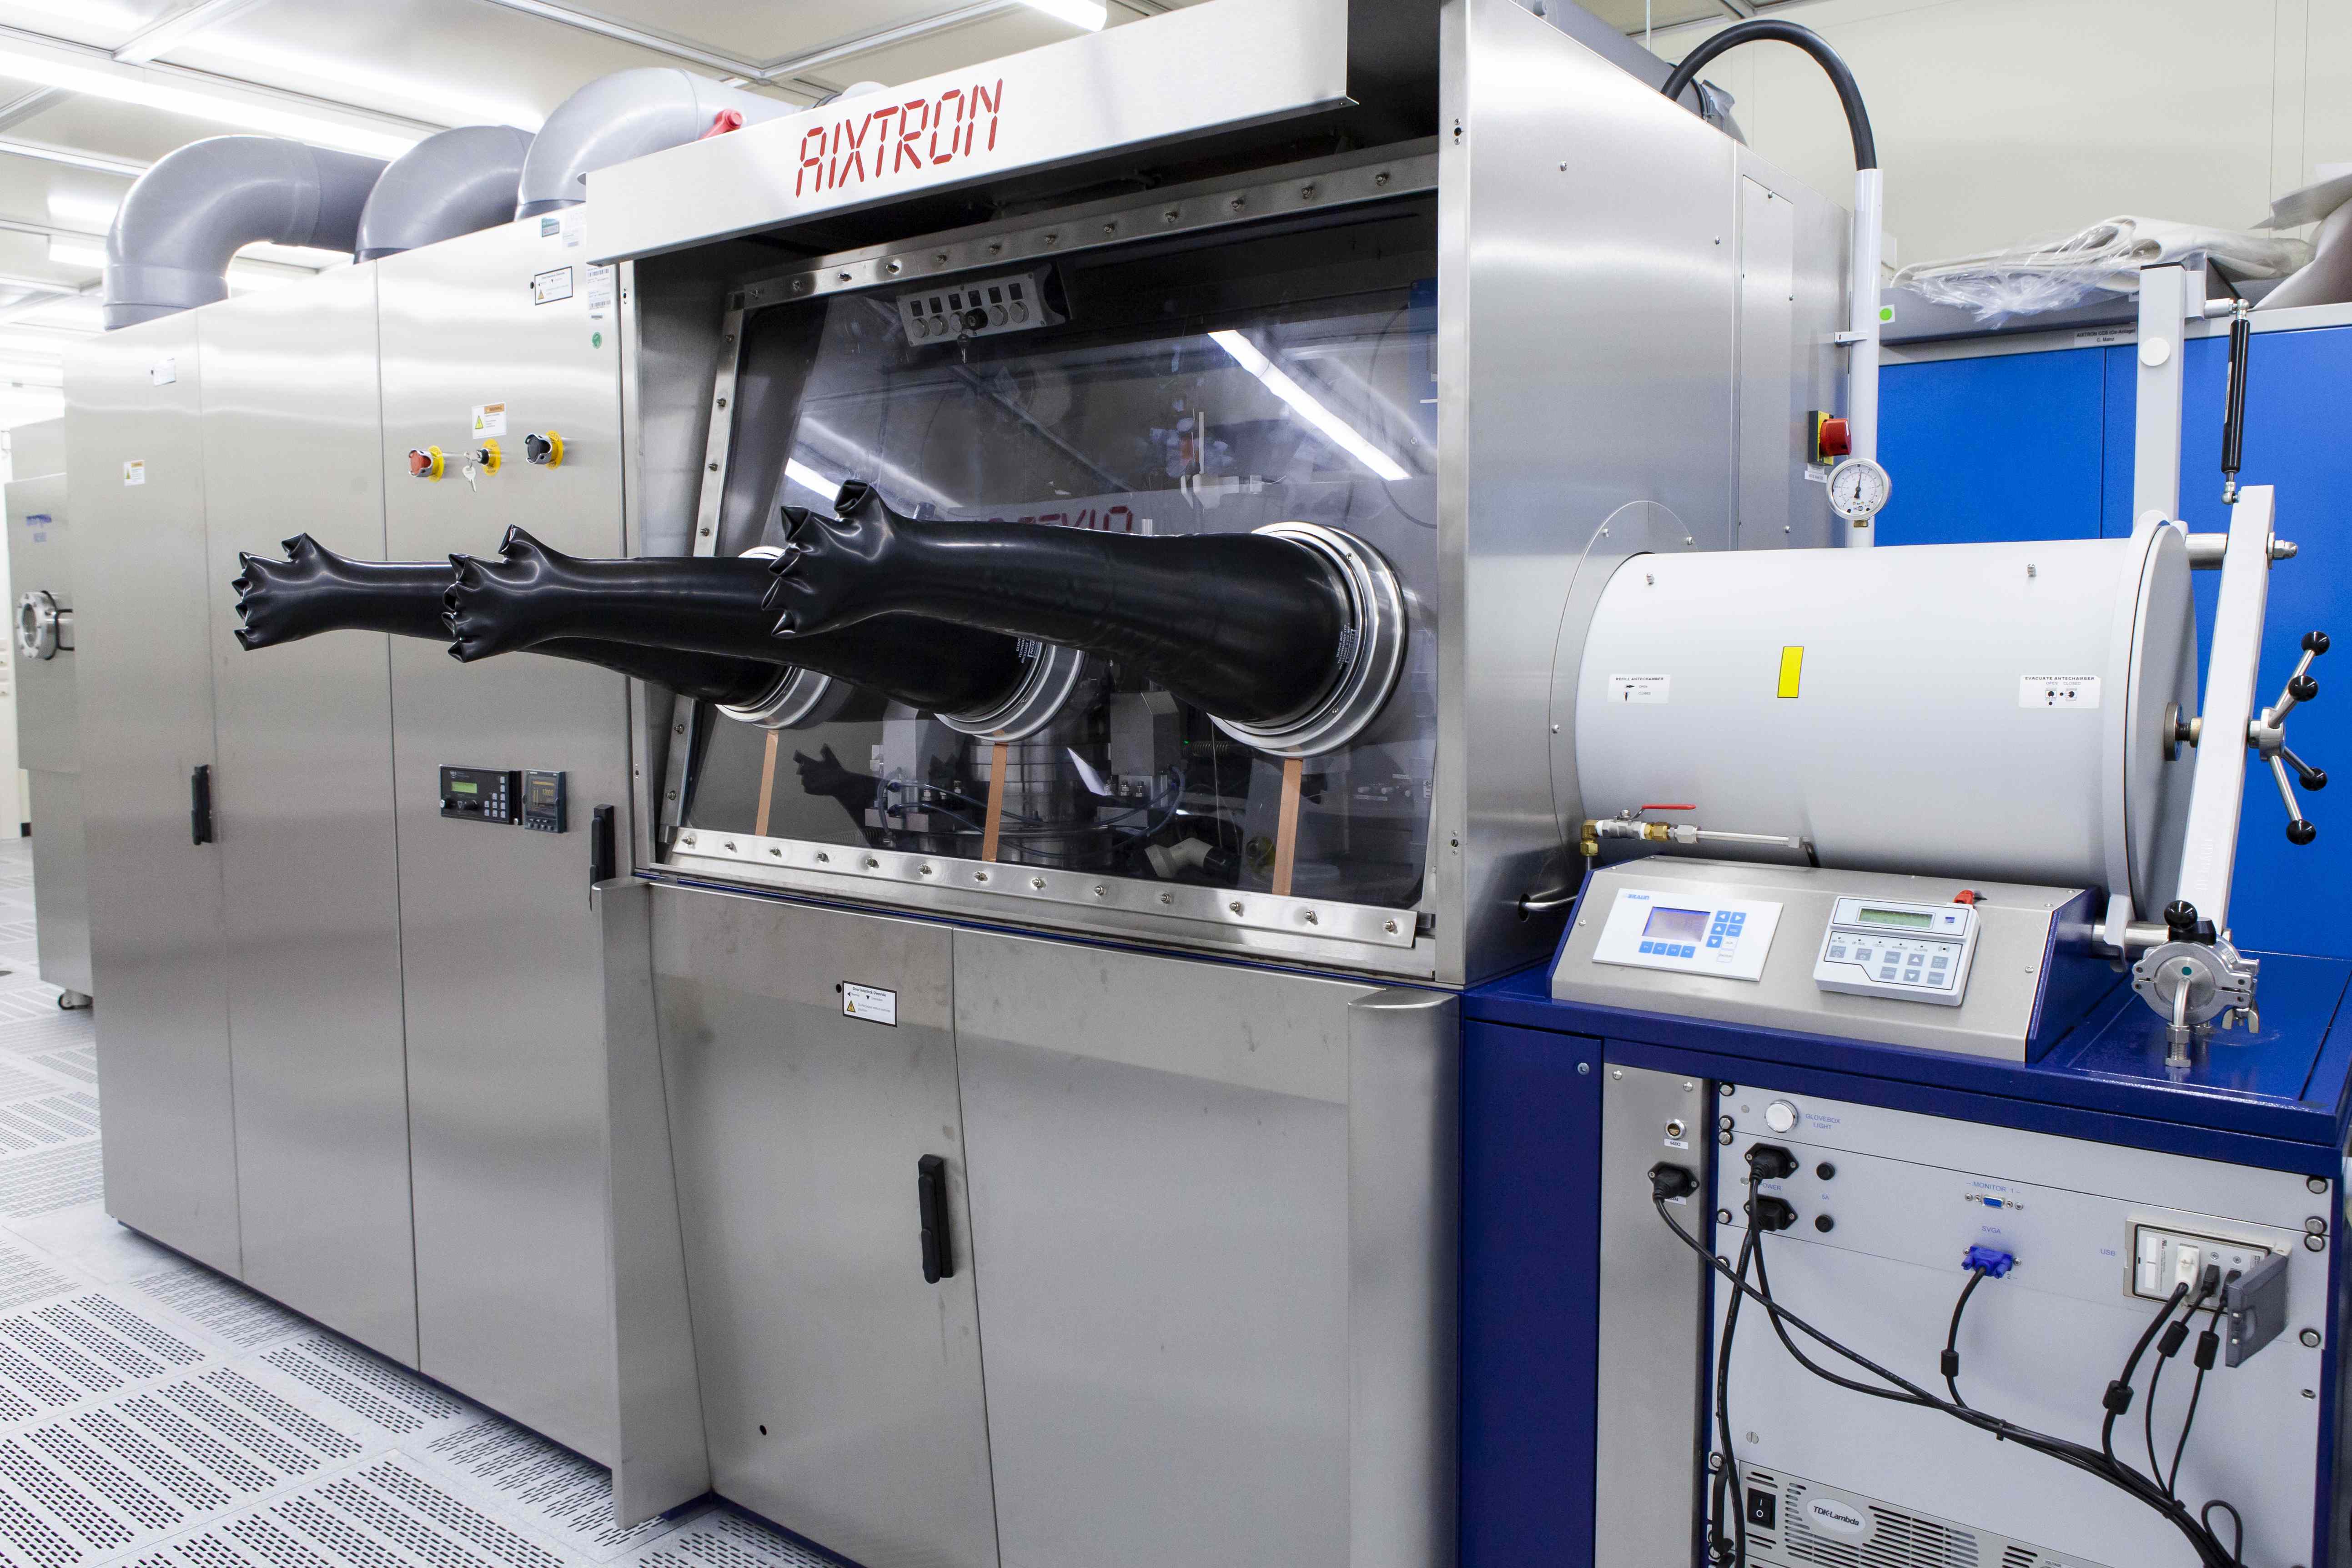 The MOCVD system of Fraunhofer IAF has been modified by the research group to enable the growth of AlScN with sufficient quality and productivity for industry.